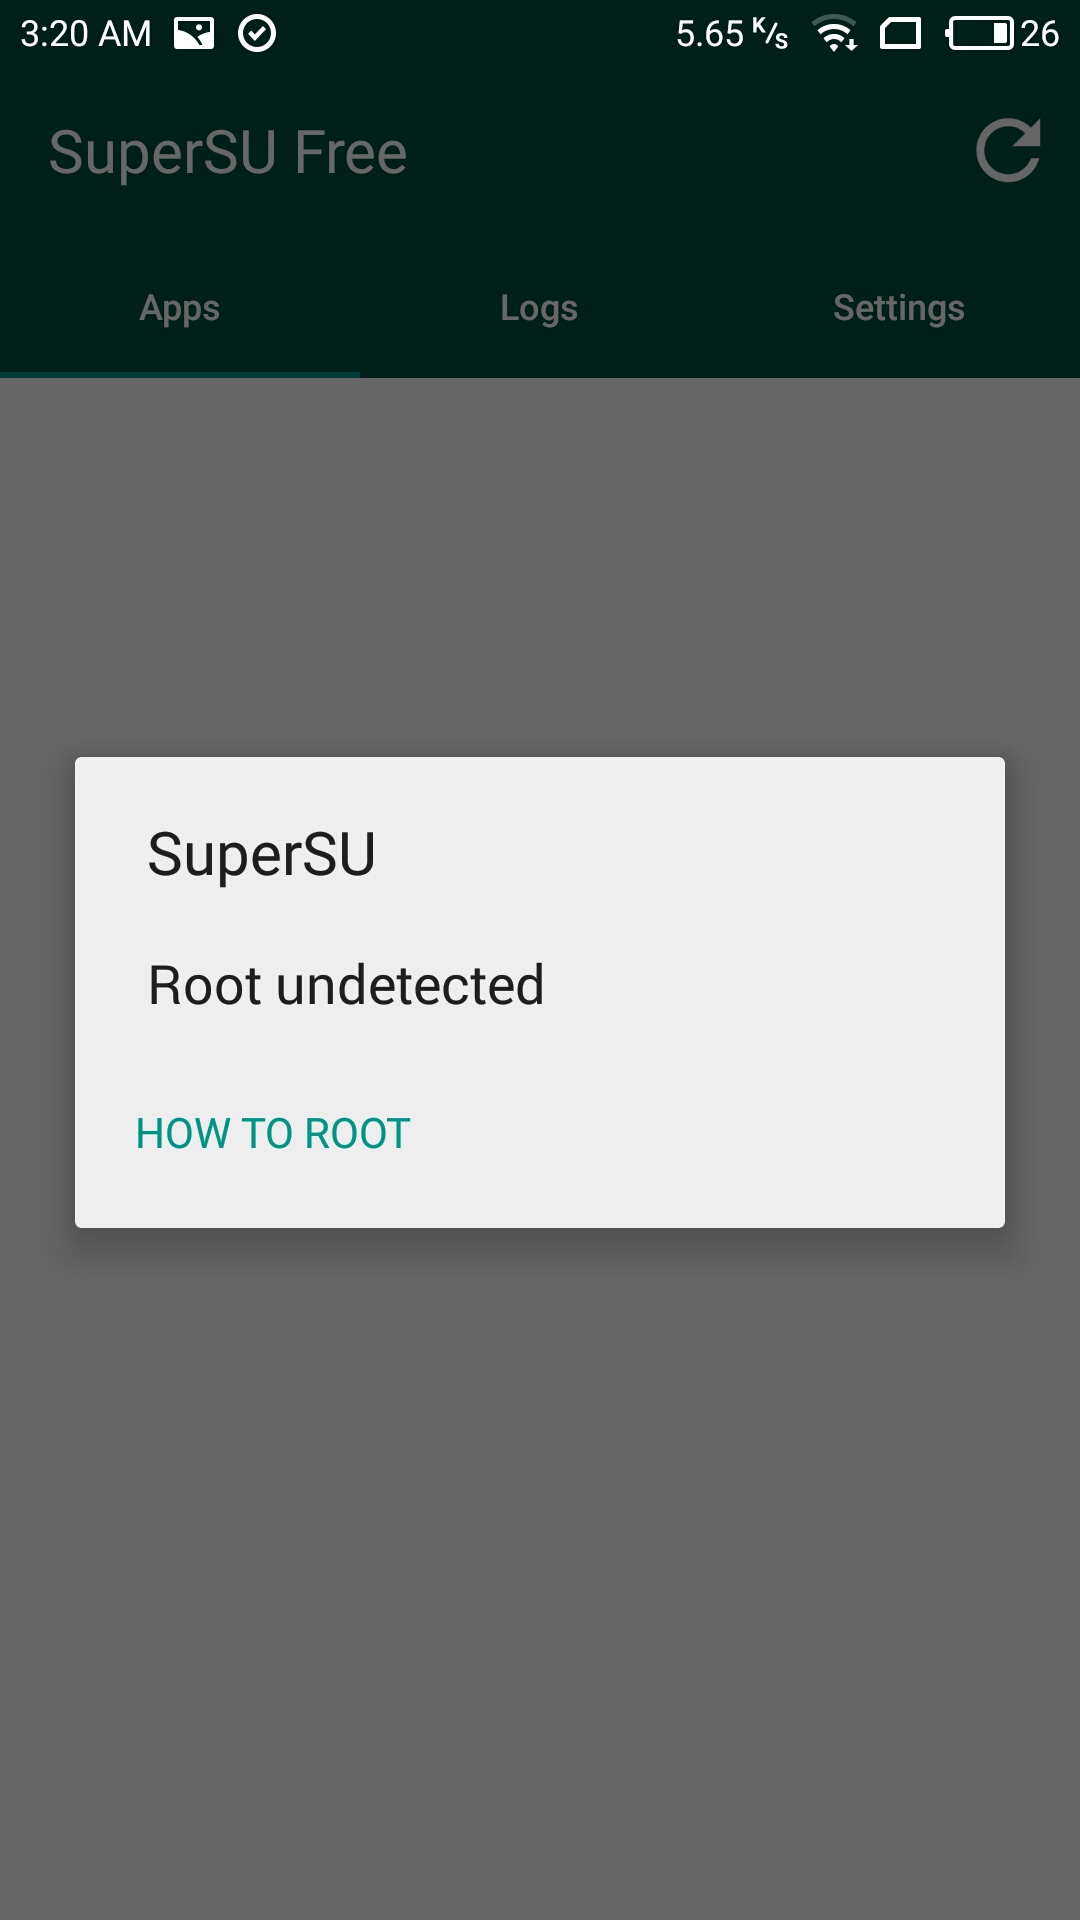 Same here root undetected